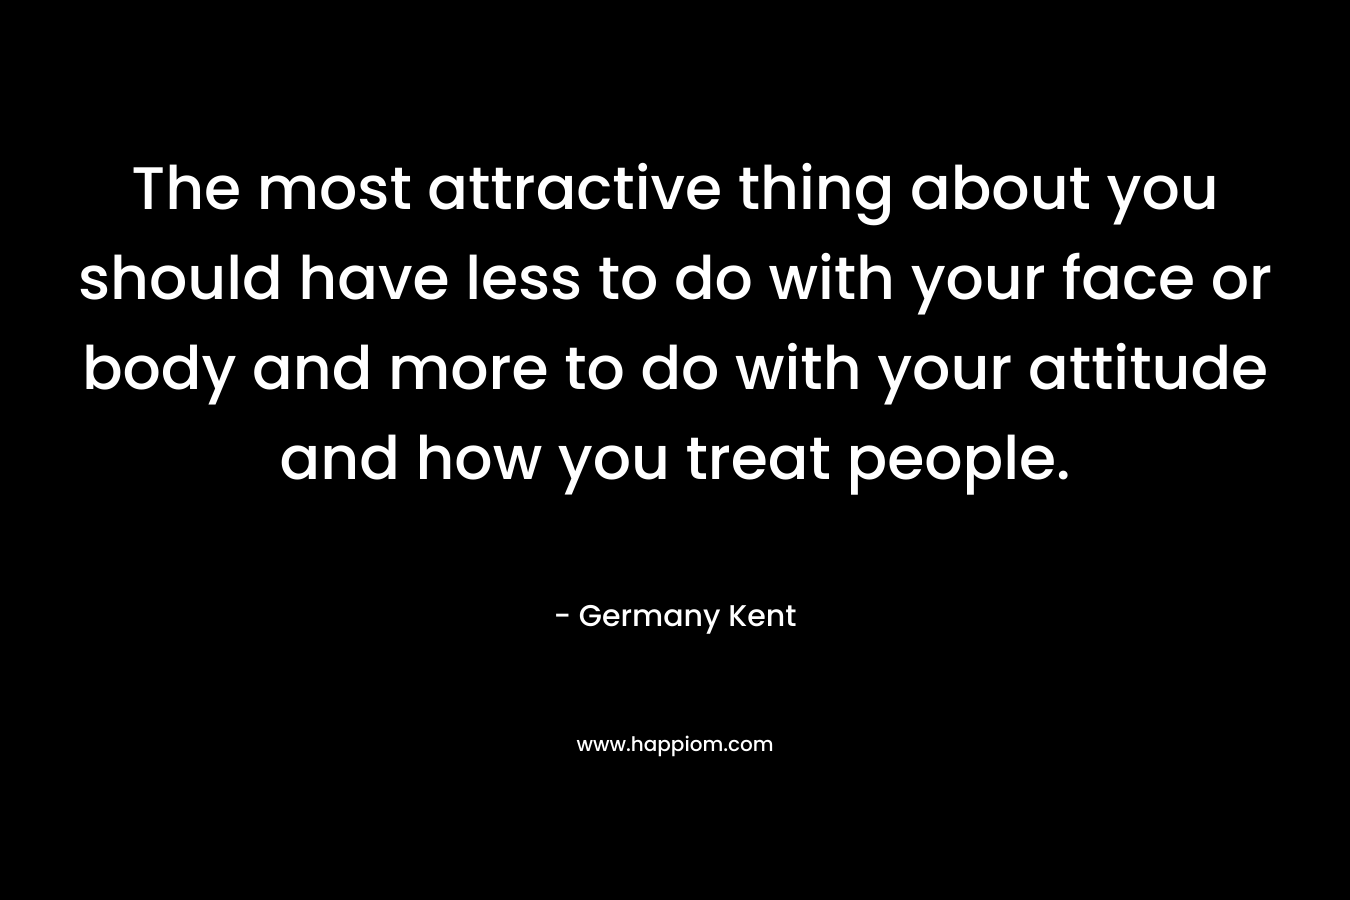 The most attractive thing about you should have less to do with your face or body and more to do with your attitude and how you treat people.